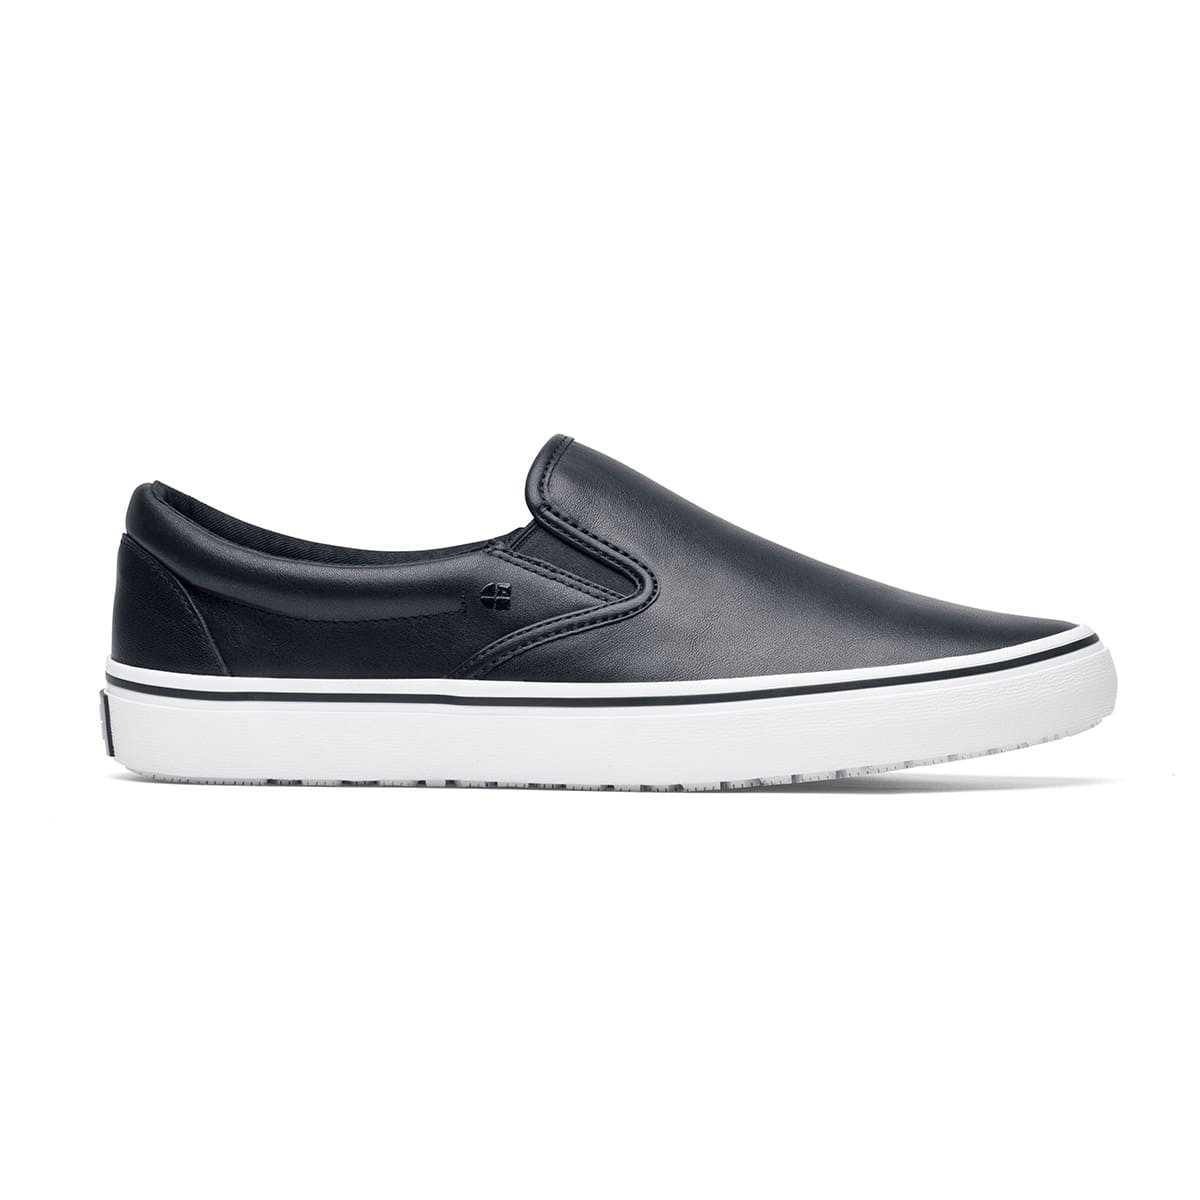 The Merlin Slip On Black and White from Shoes For Crews are slip-on trainers that are slip-resistant, lightweight, easy to clean and water-resistant, seen from the right.